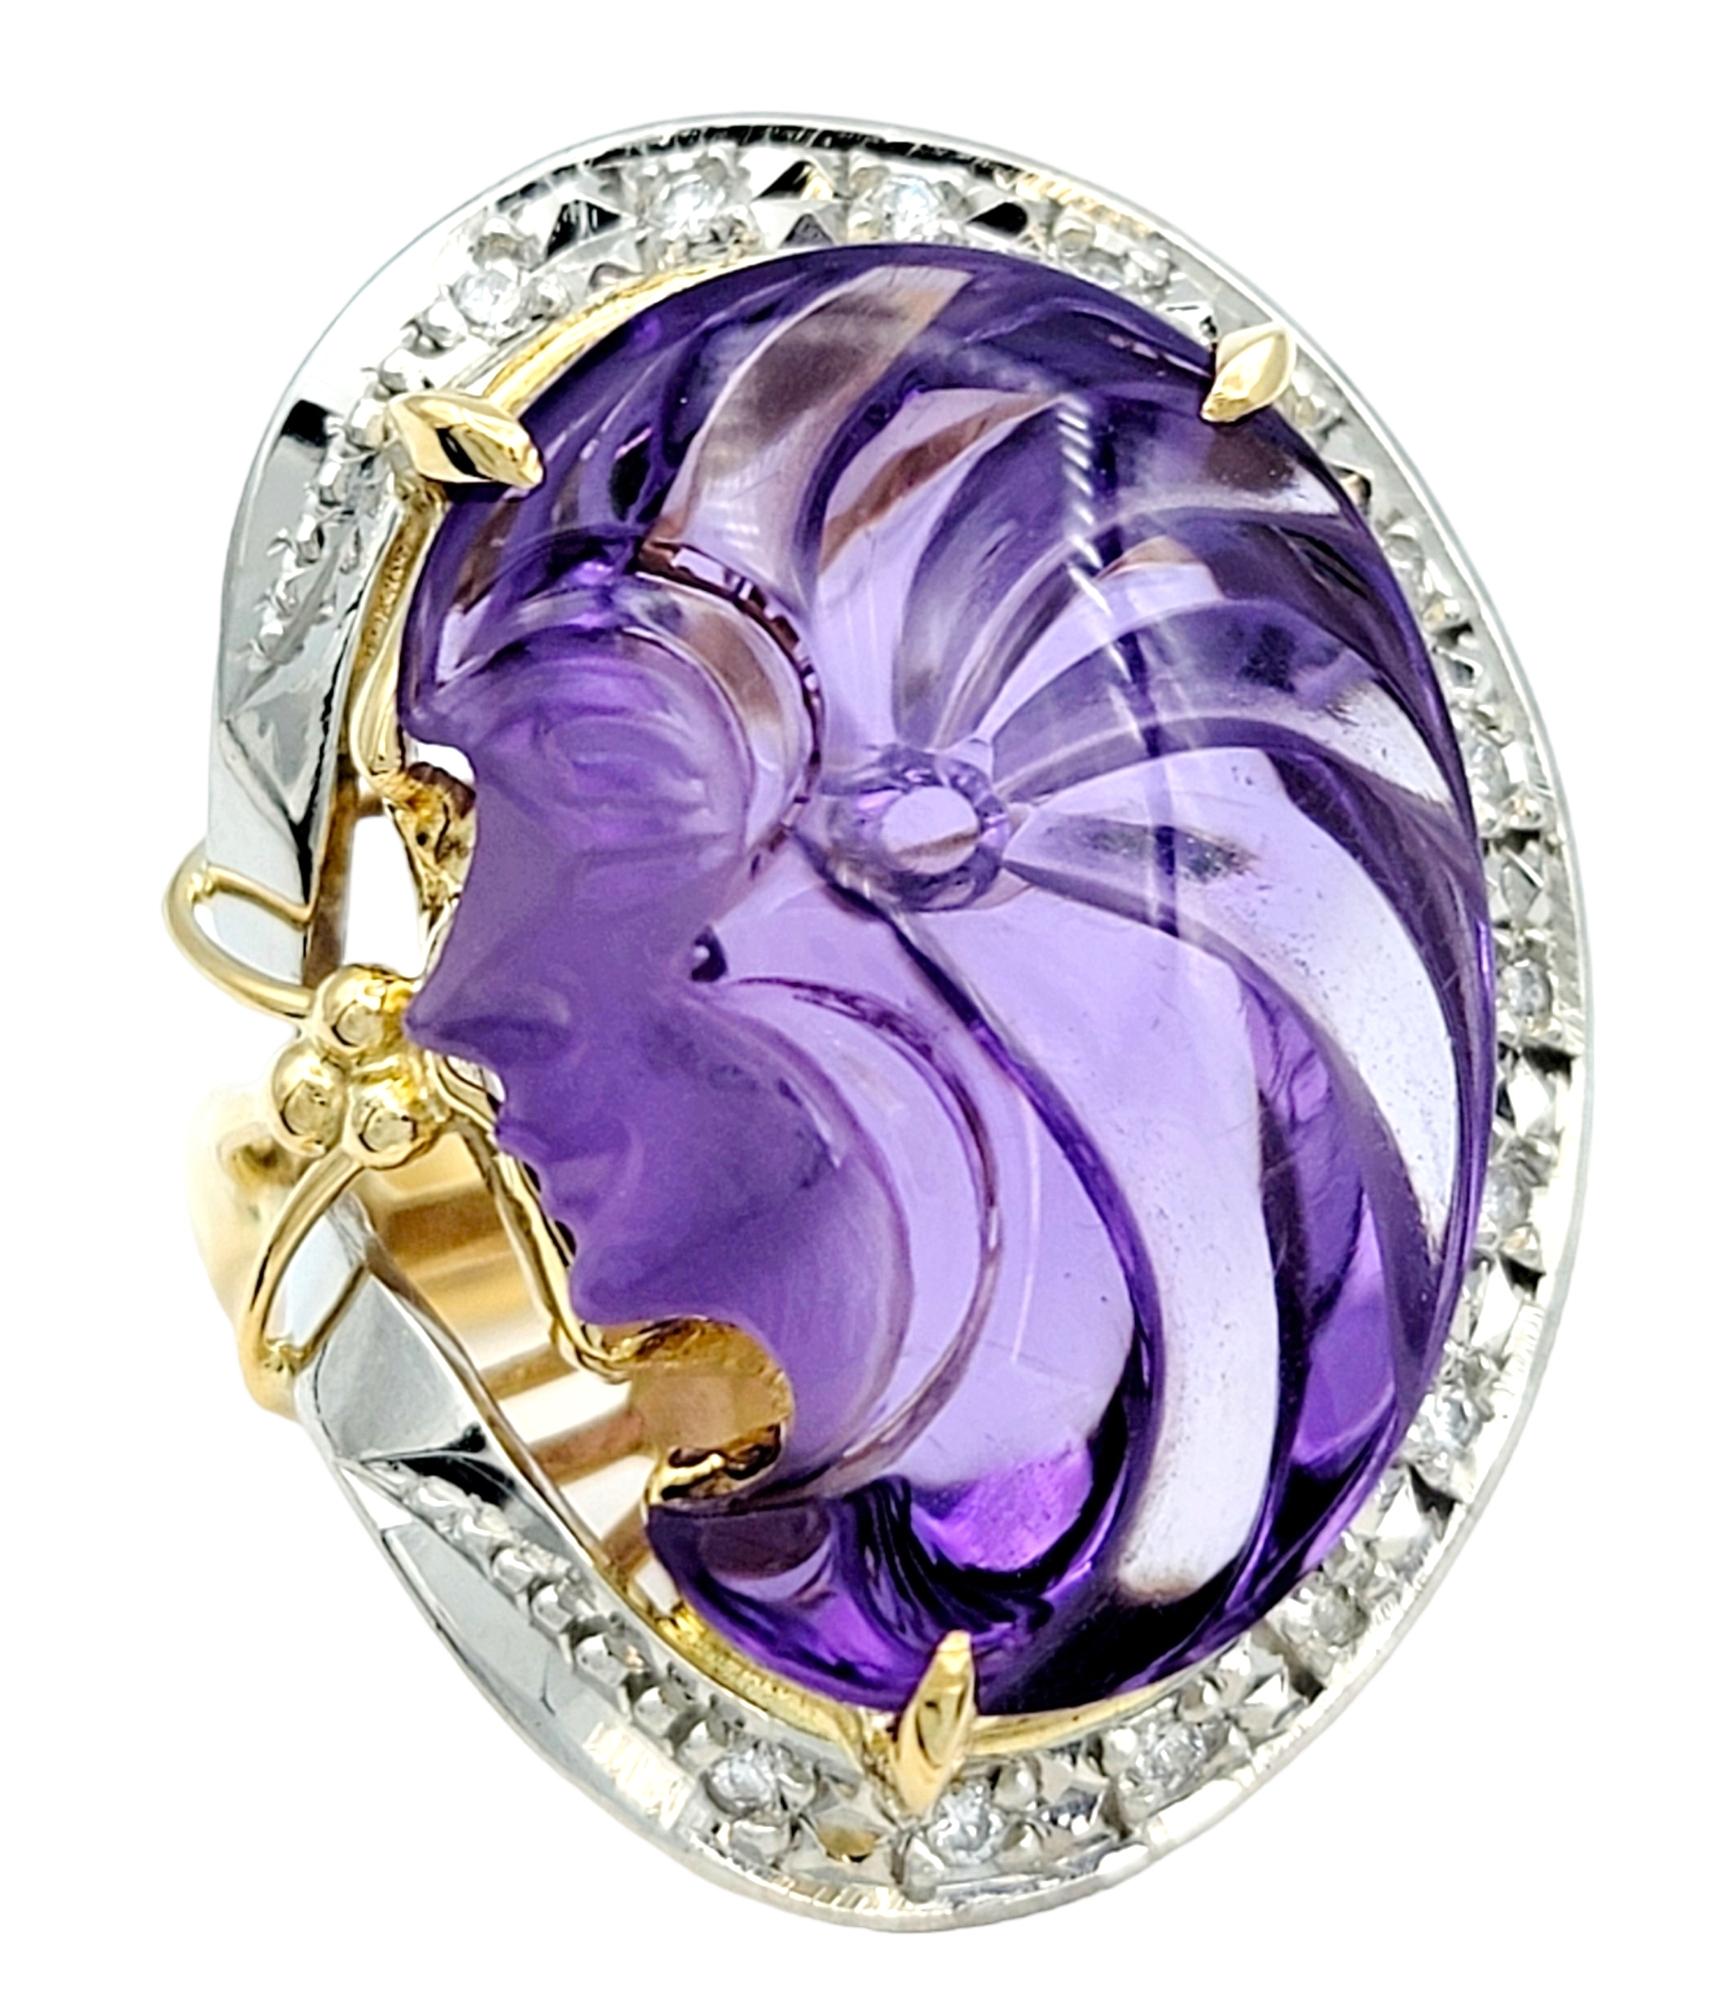 Ring size: 6

This wonderfully unique two-tone carved amethyst cameo ring is an absolute treasure. This piece is a true work of art in both design and craftsmanship, blending timeless beauty with modern luxury.

The centerpiece of this ring is a